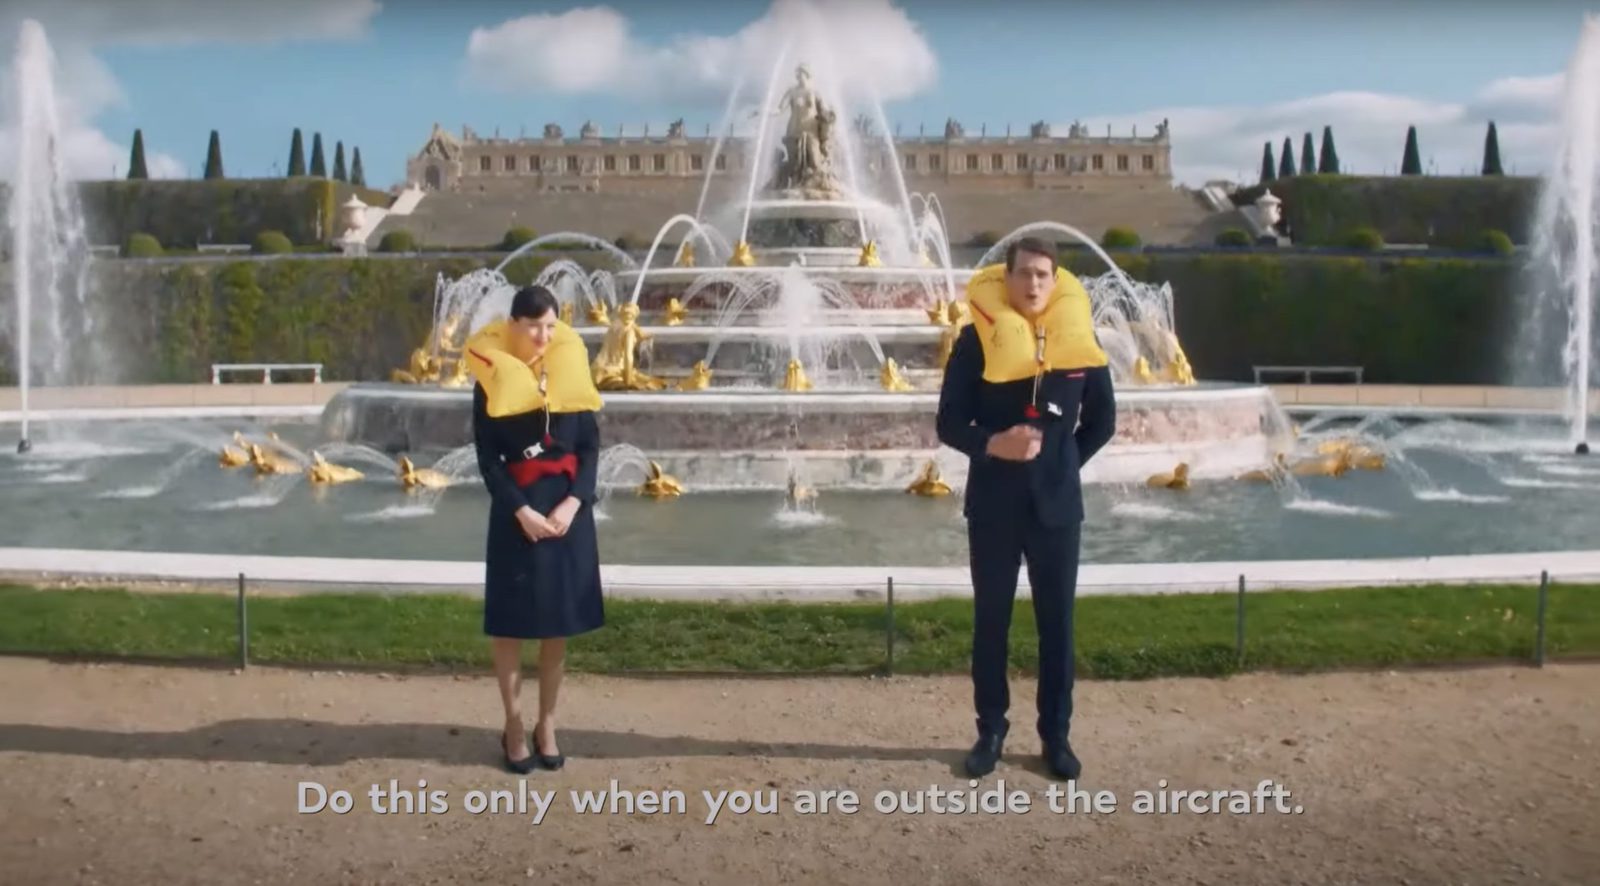 Discover the new Safety Instructions movie for Air France!

